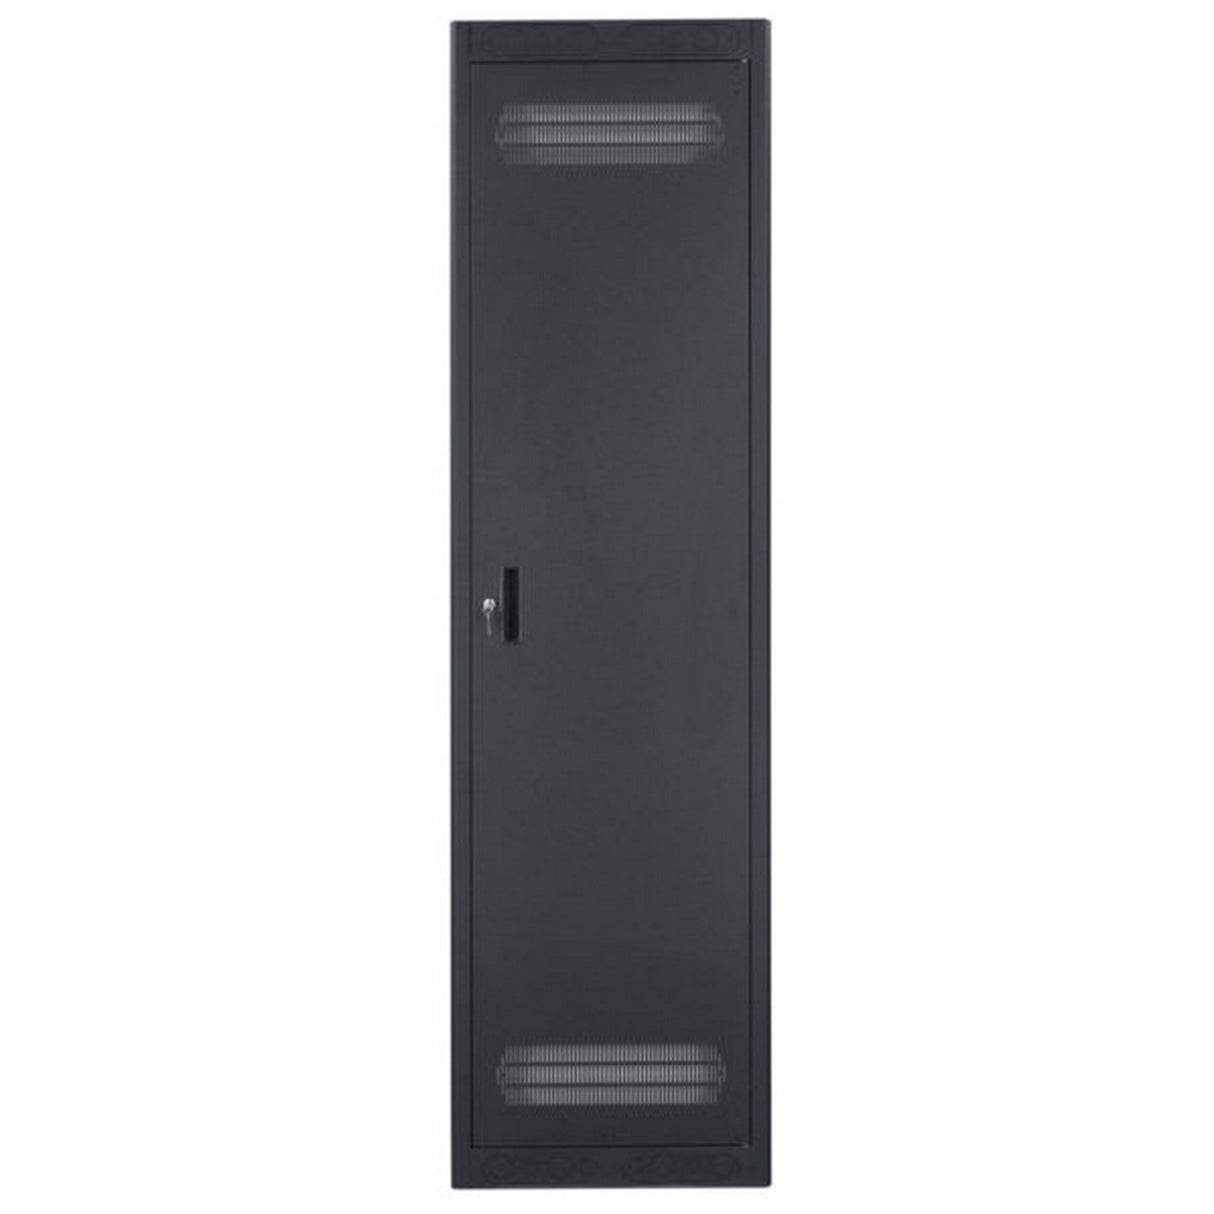 Lowell LER-4427 Enclosed Rack with Rear Door, 44 x 27 Inch